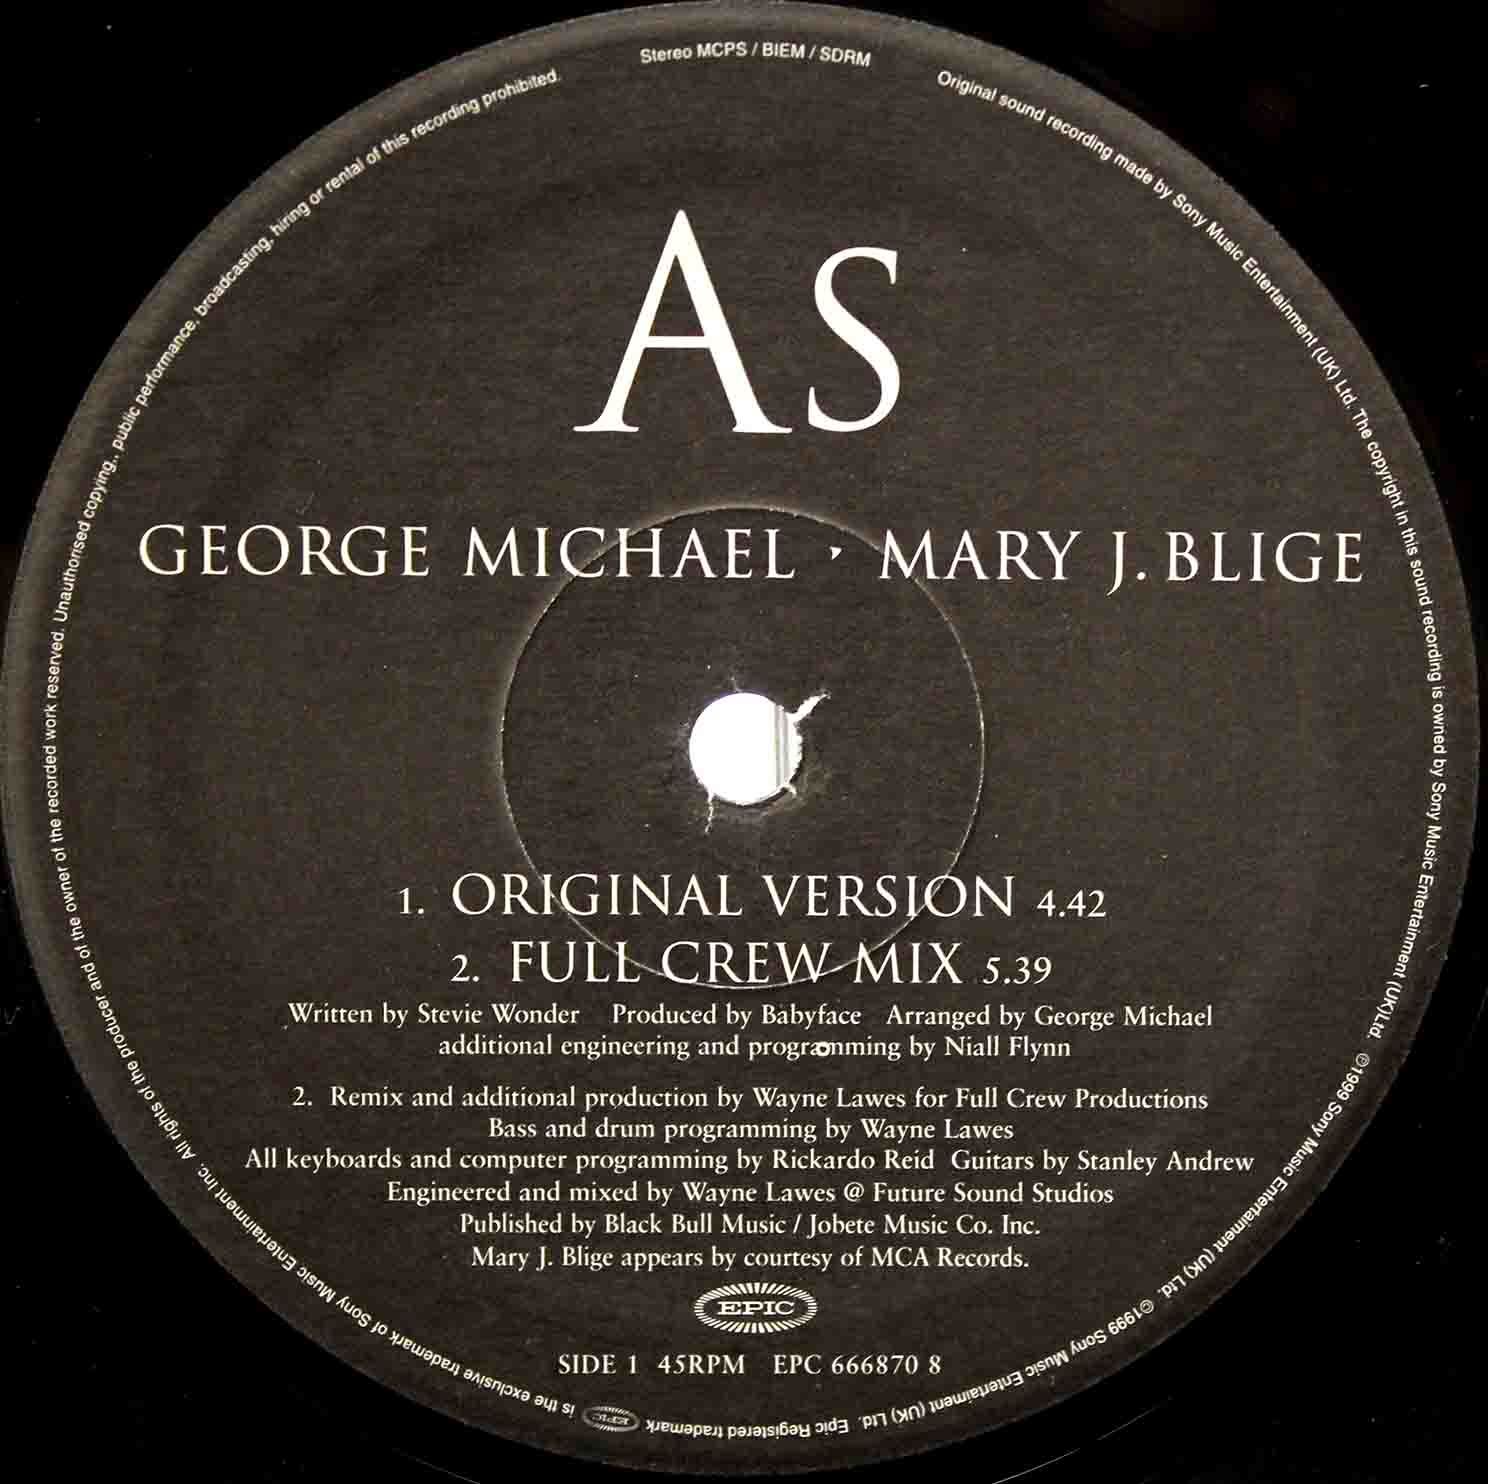 George Michael Mary J Blige - As 04